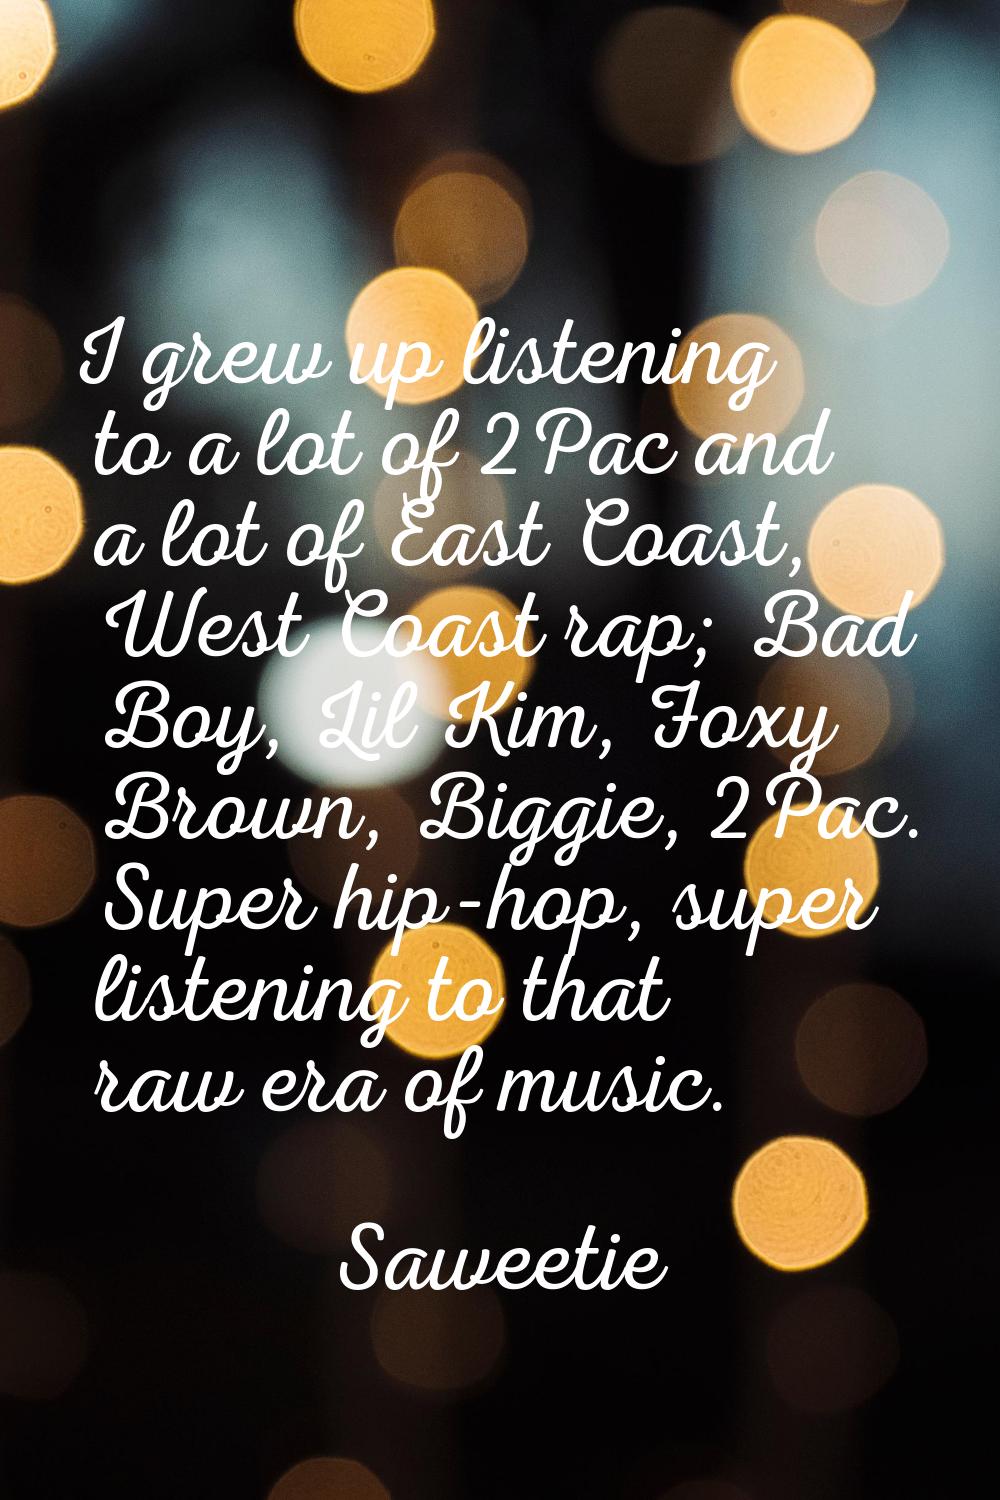 I grew up listening to a lot of 2Pac and a lot of East Coast, West Coast rap; Bad Boy, Lil Kim, Fox